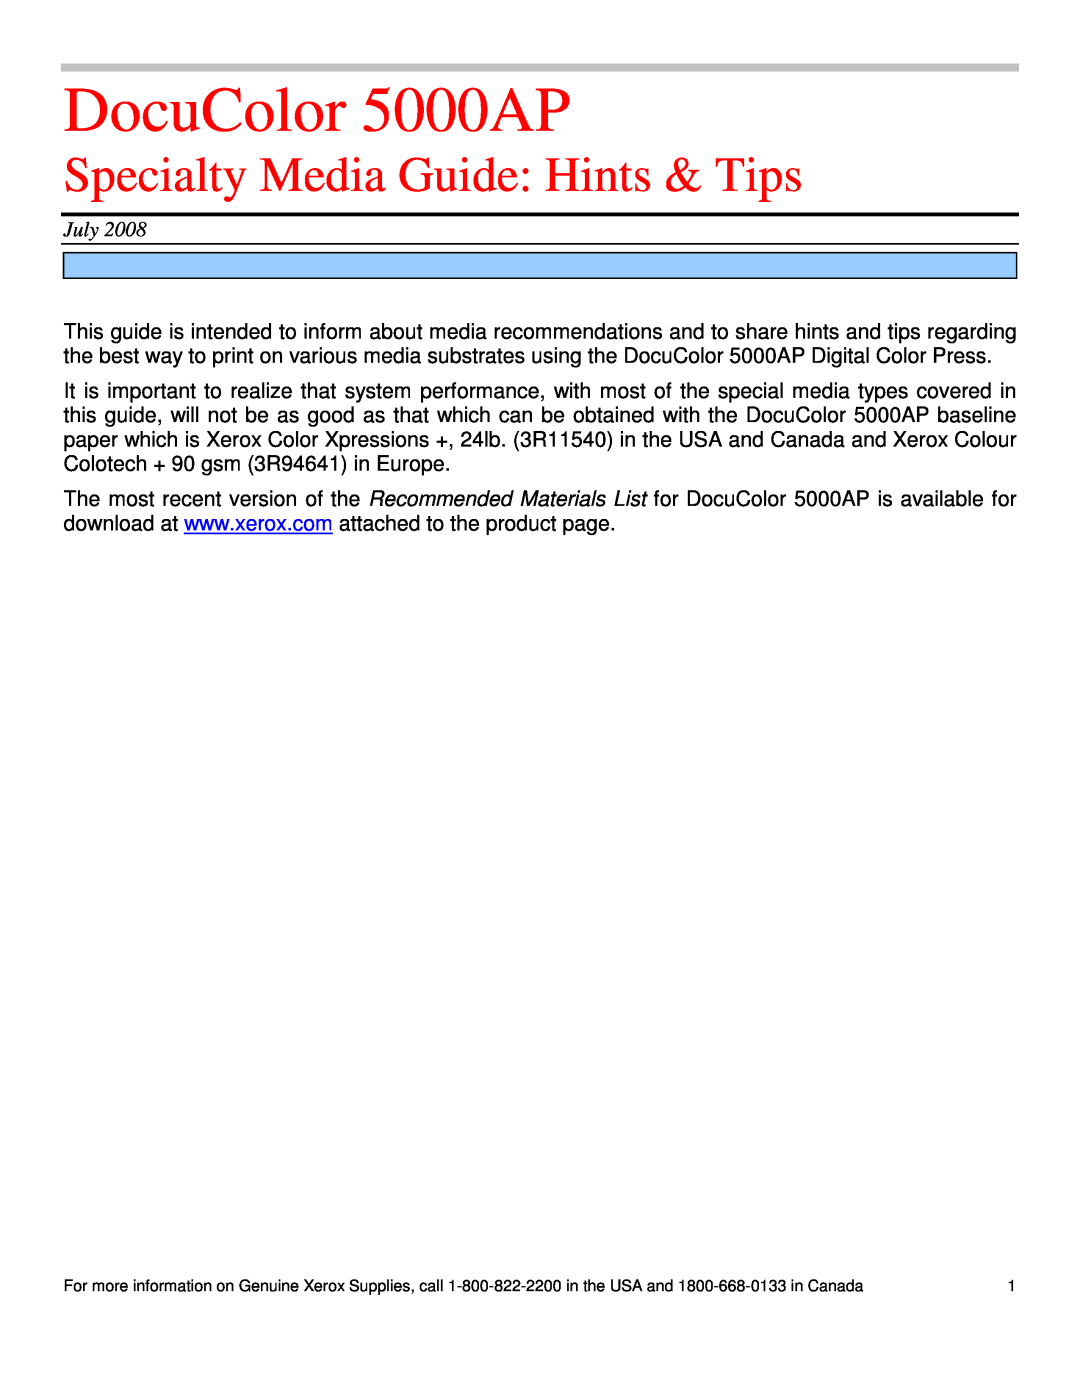 Xerox manual Specialty Media Guide Hints & Tips, July, DocuColor 5000AP 